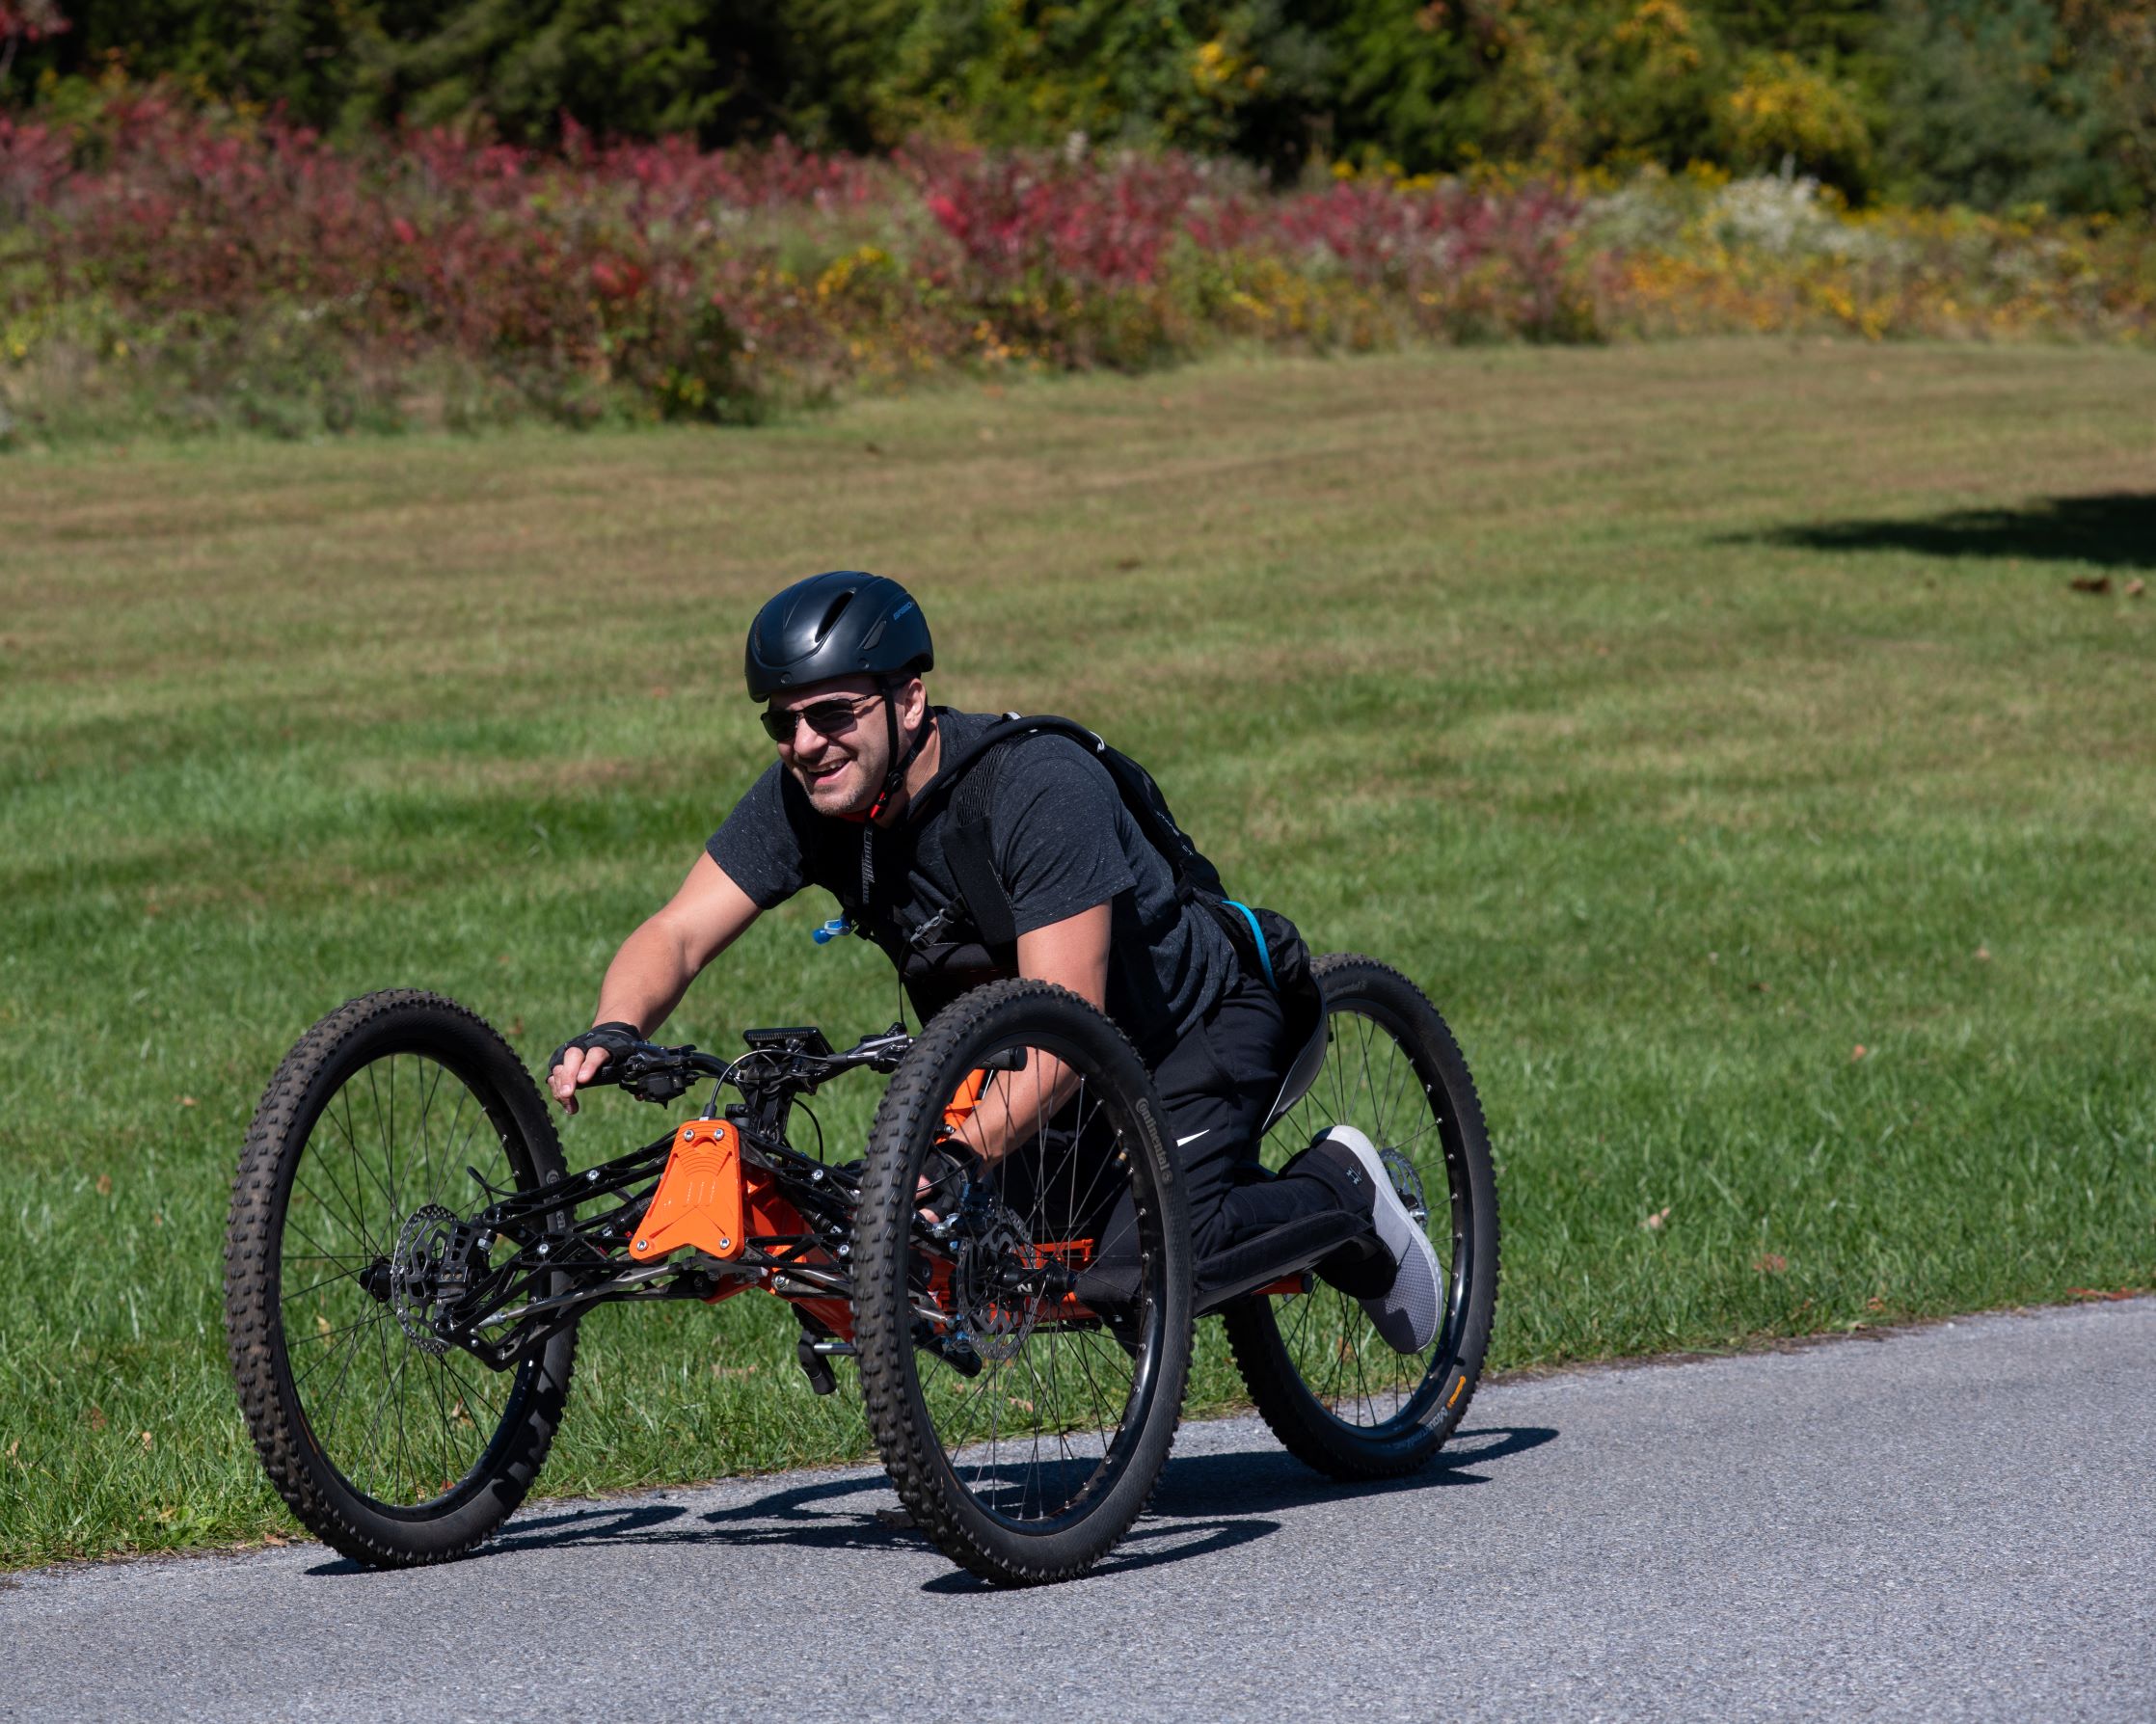 A man pedals down a road using an adaptive bicycle against a background of a green field